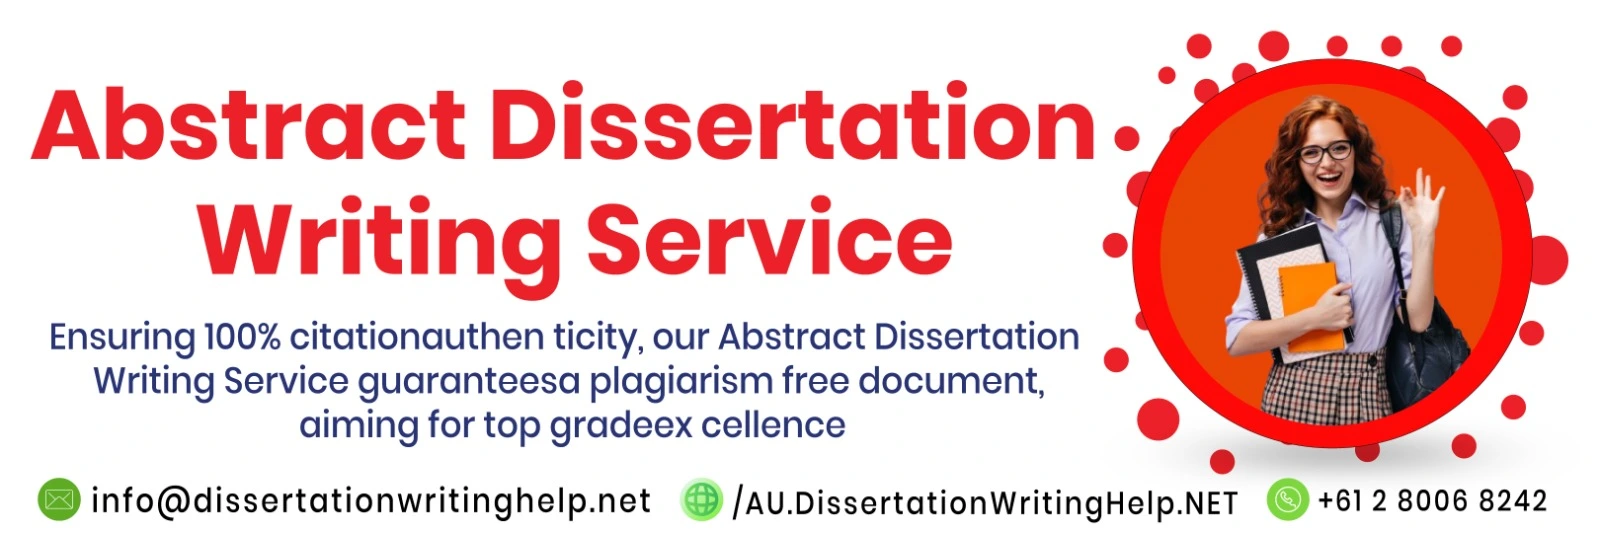 Abstract Dissertation Writing Service